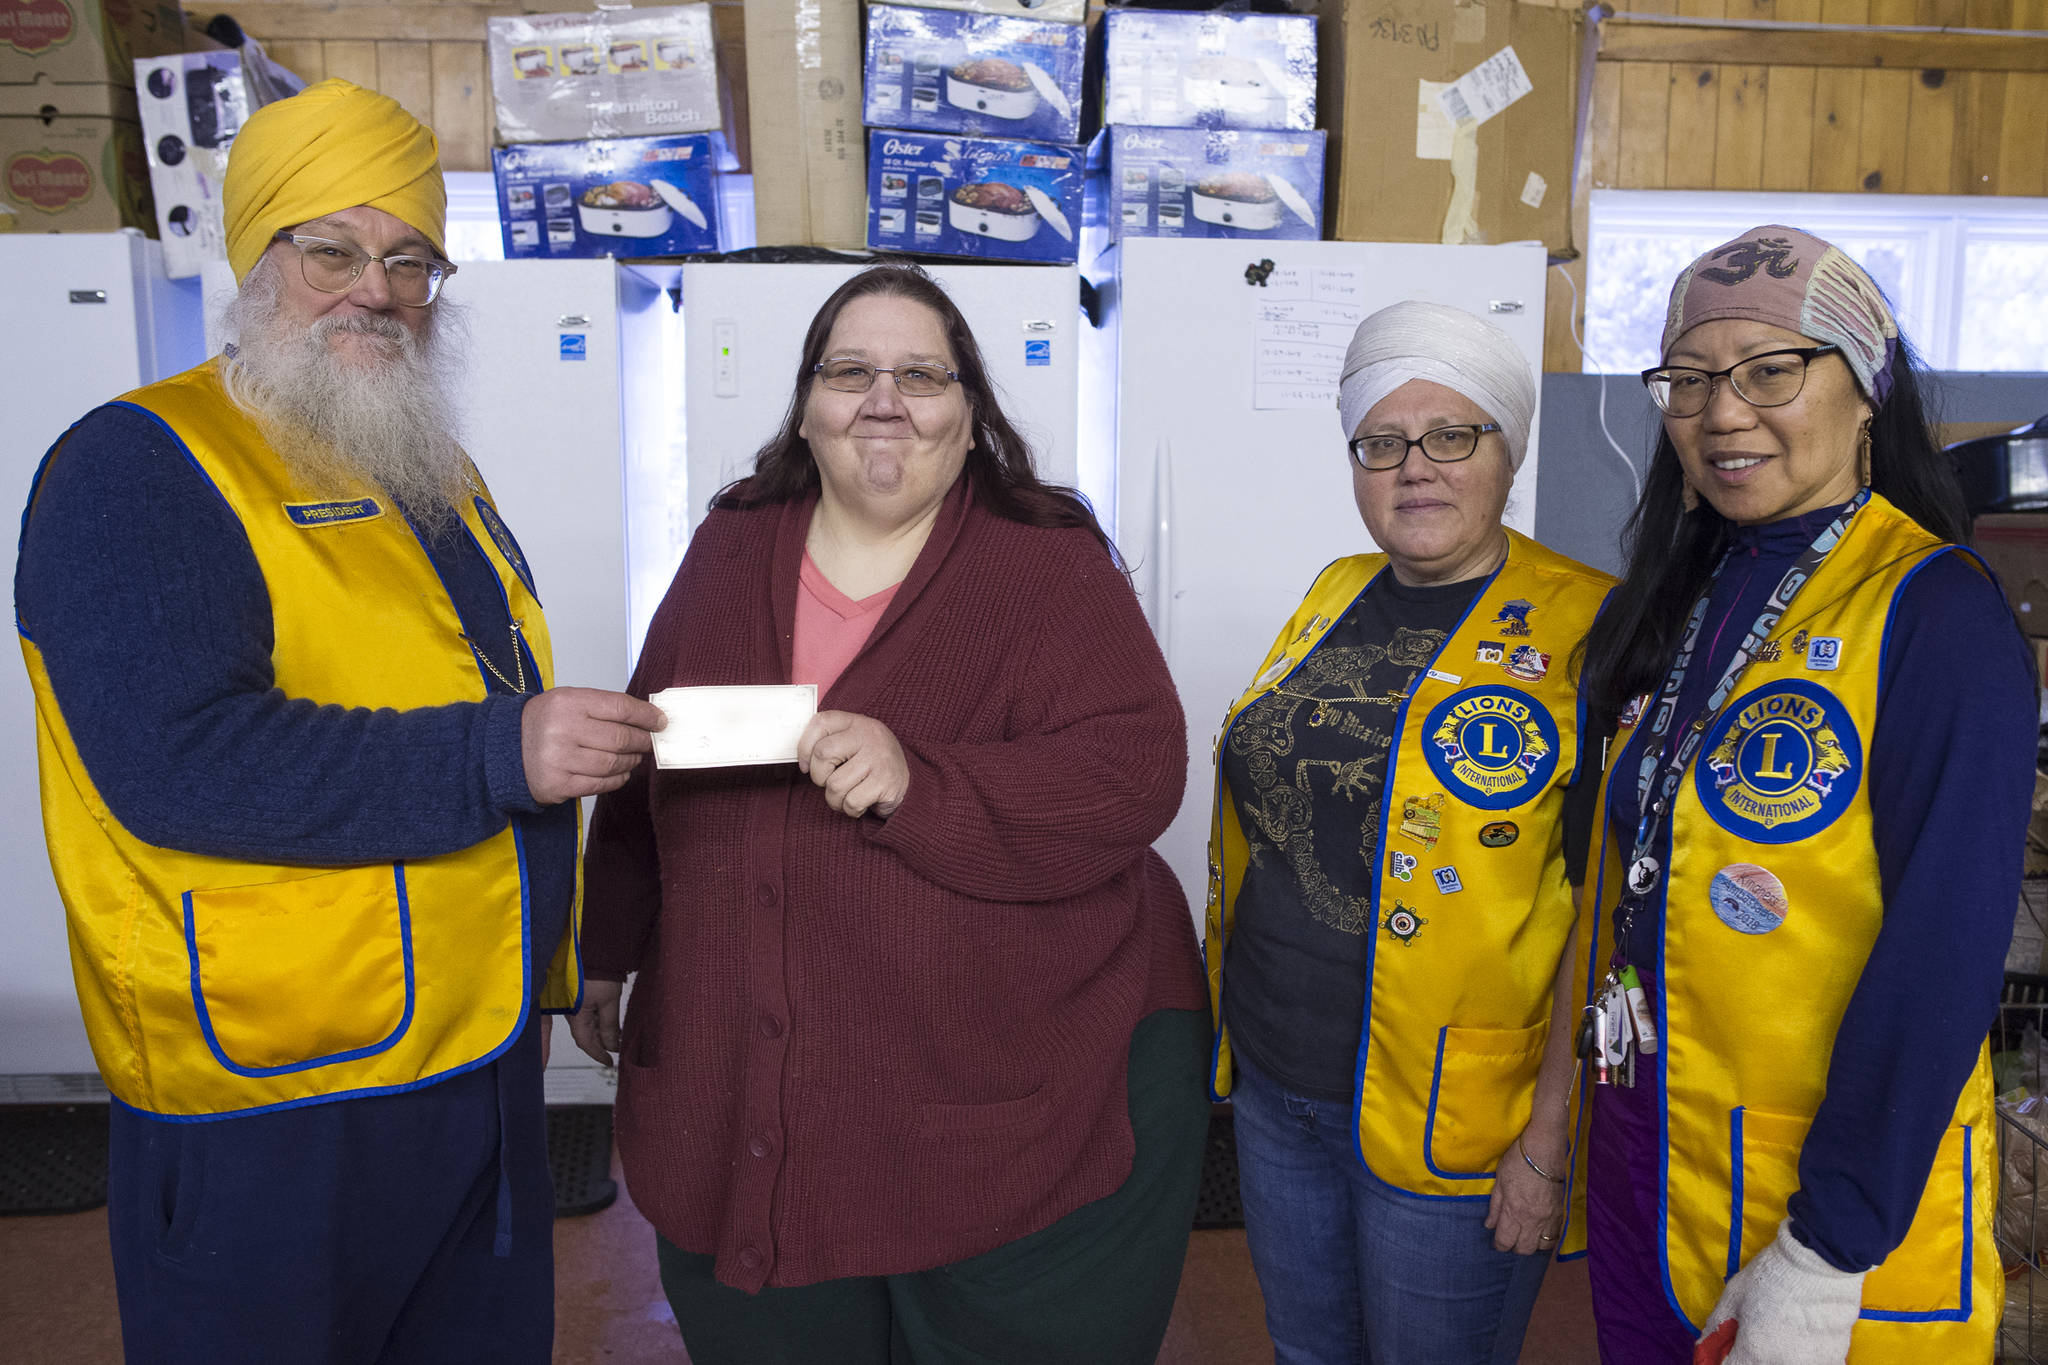 Hari Dev Khalsa, left, President of the Mendenhall Flying Lions Club, his wife, Mukhya Khalsa, second from right, and Nartej Garcia, right, present Karen Fortwengler of Helping Hands of Alaska with a check for $400 at the food bank office in Switzer Village on Friday, Jan. 11, 2019. Along with the money, club members donate about 80 hours a week to help gather and distribute food. The food bank is open for distribution Tuesday and Friday 5:30-6:50 p.m. (Michael Penn | Juneau Empire)